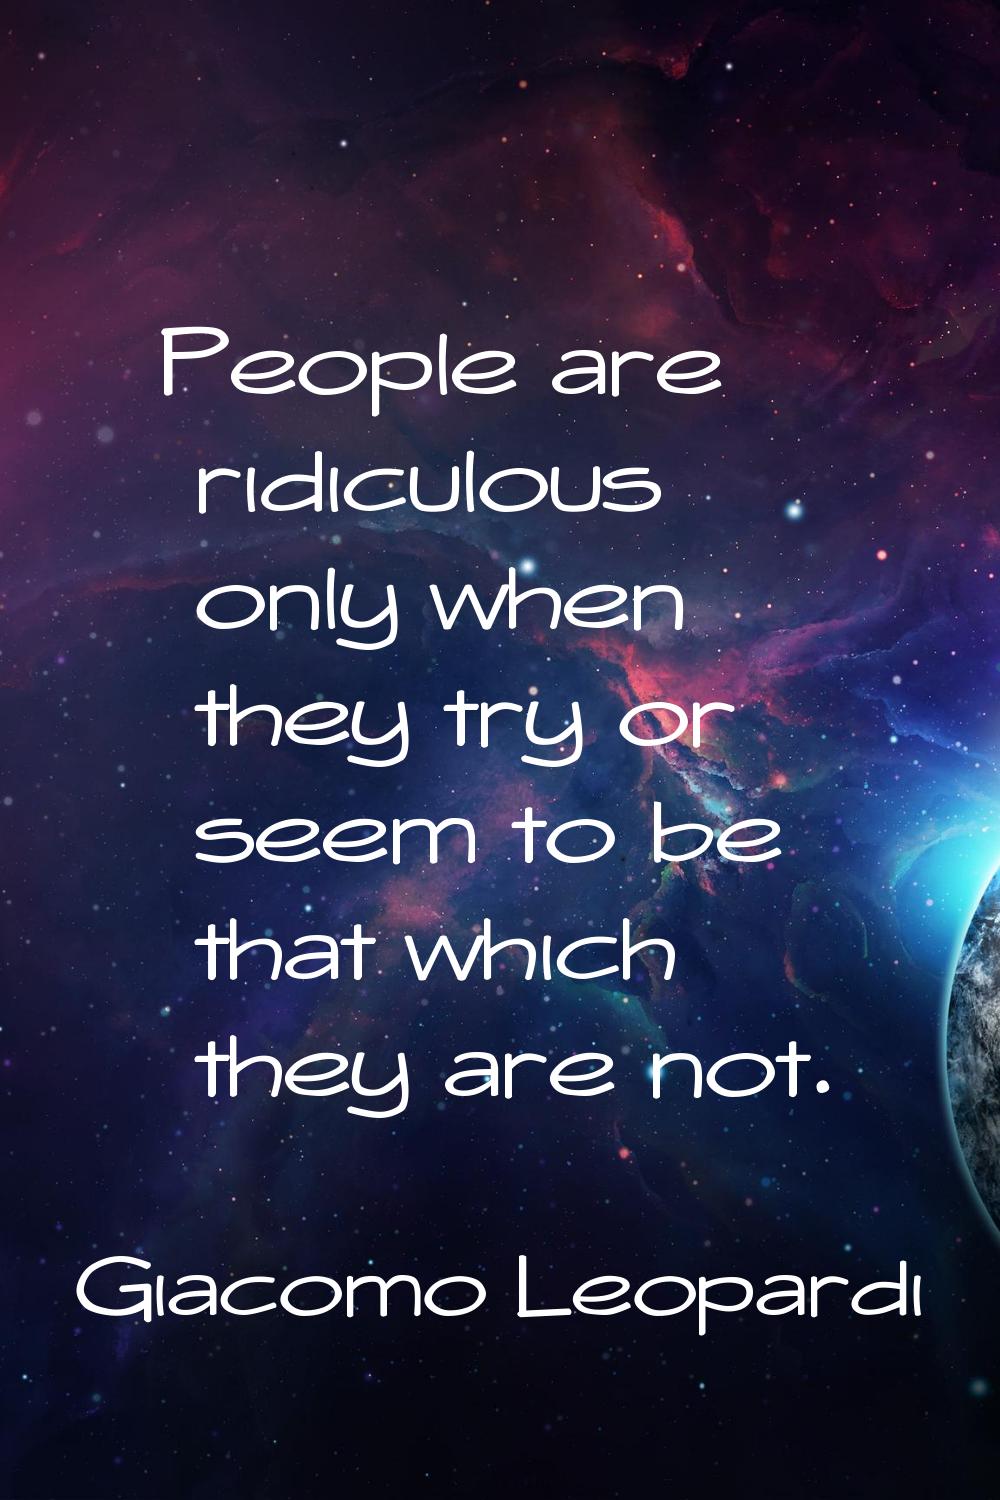 People are ridiculous only when they try or seem to be that which they are not.